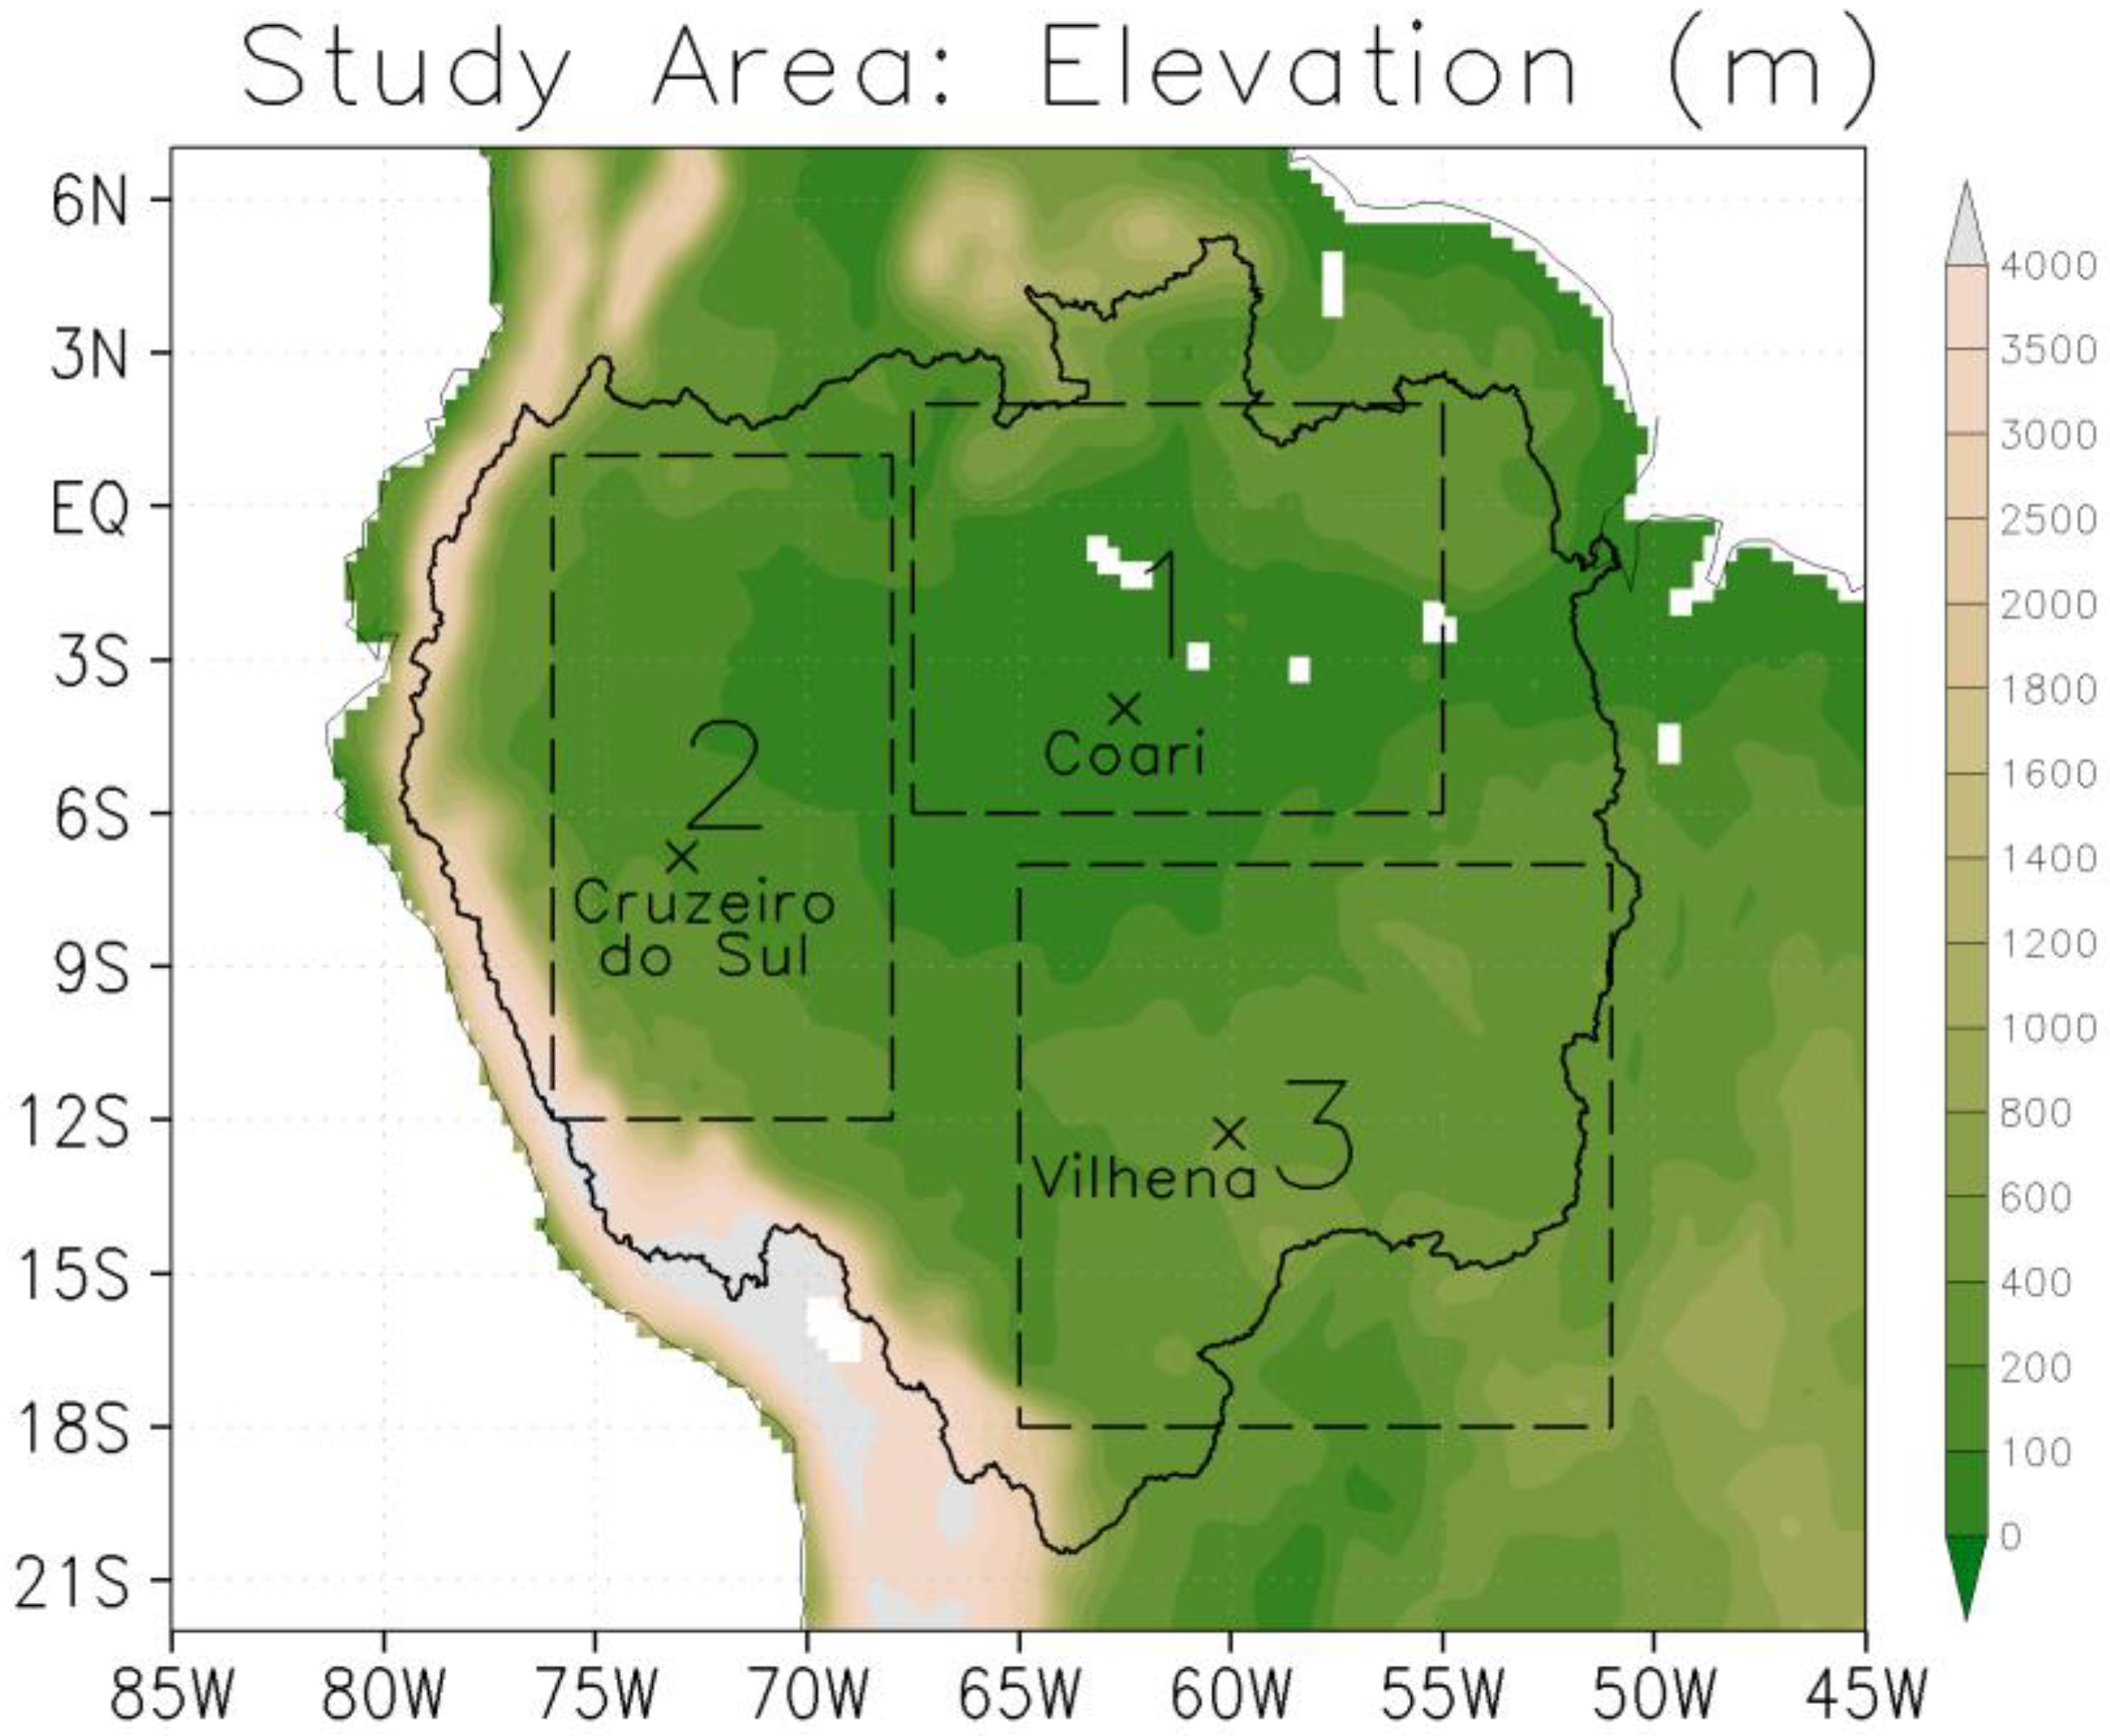 Water | Free Full-Text | Extreme Drought Events over the Amazon Basin: The  Perspective from the Reconstruction of South American Hydroclimate | HTML